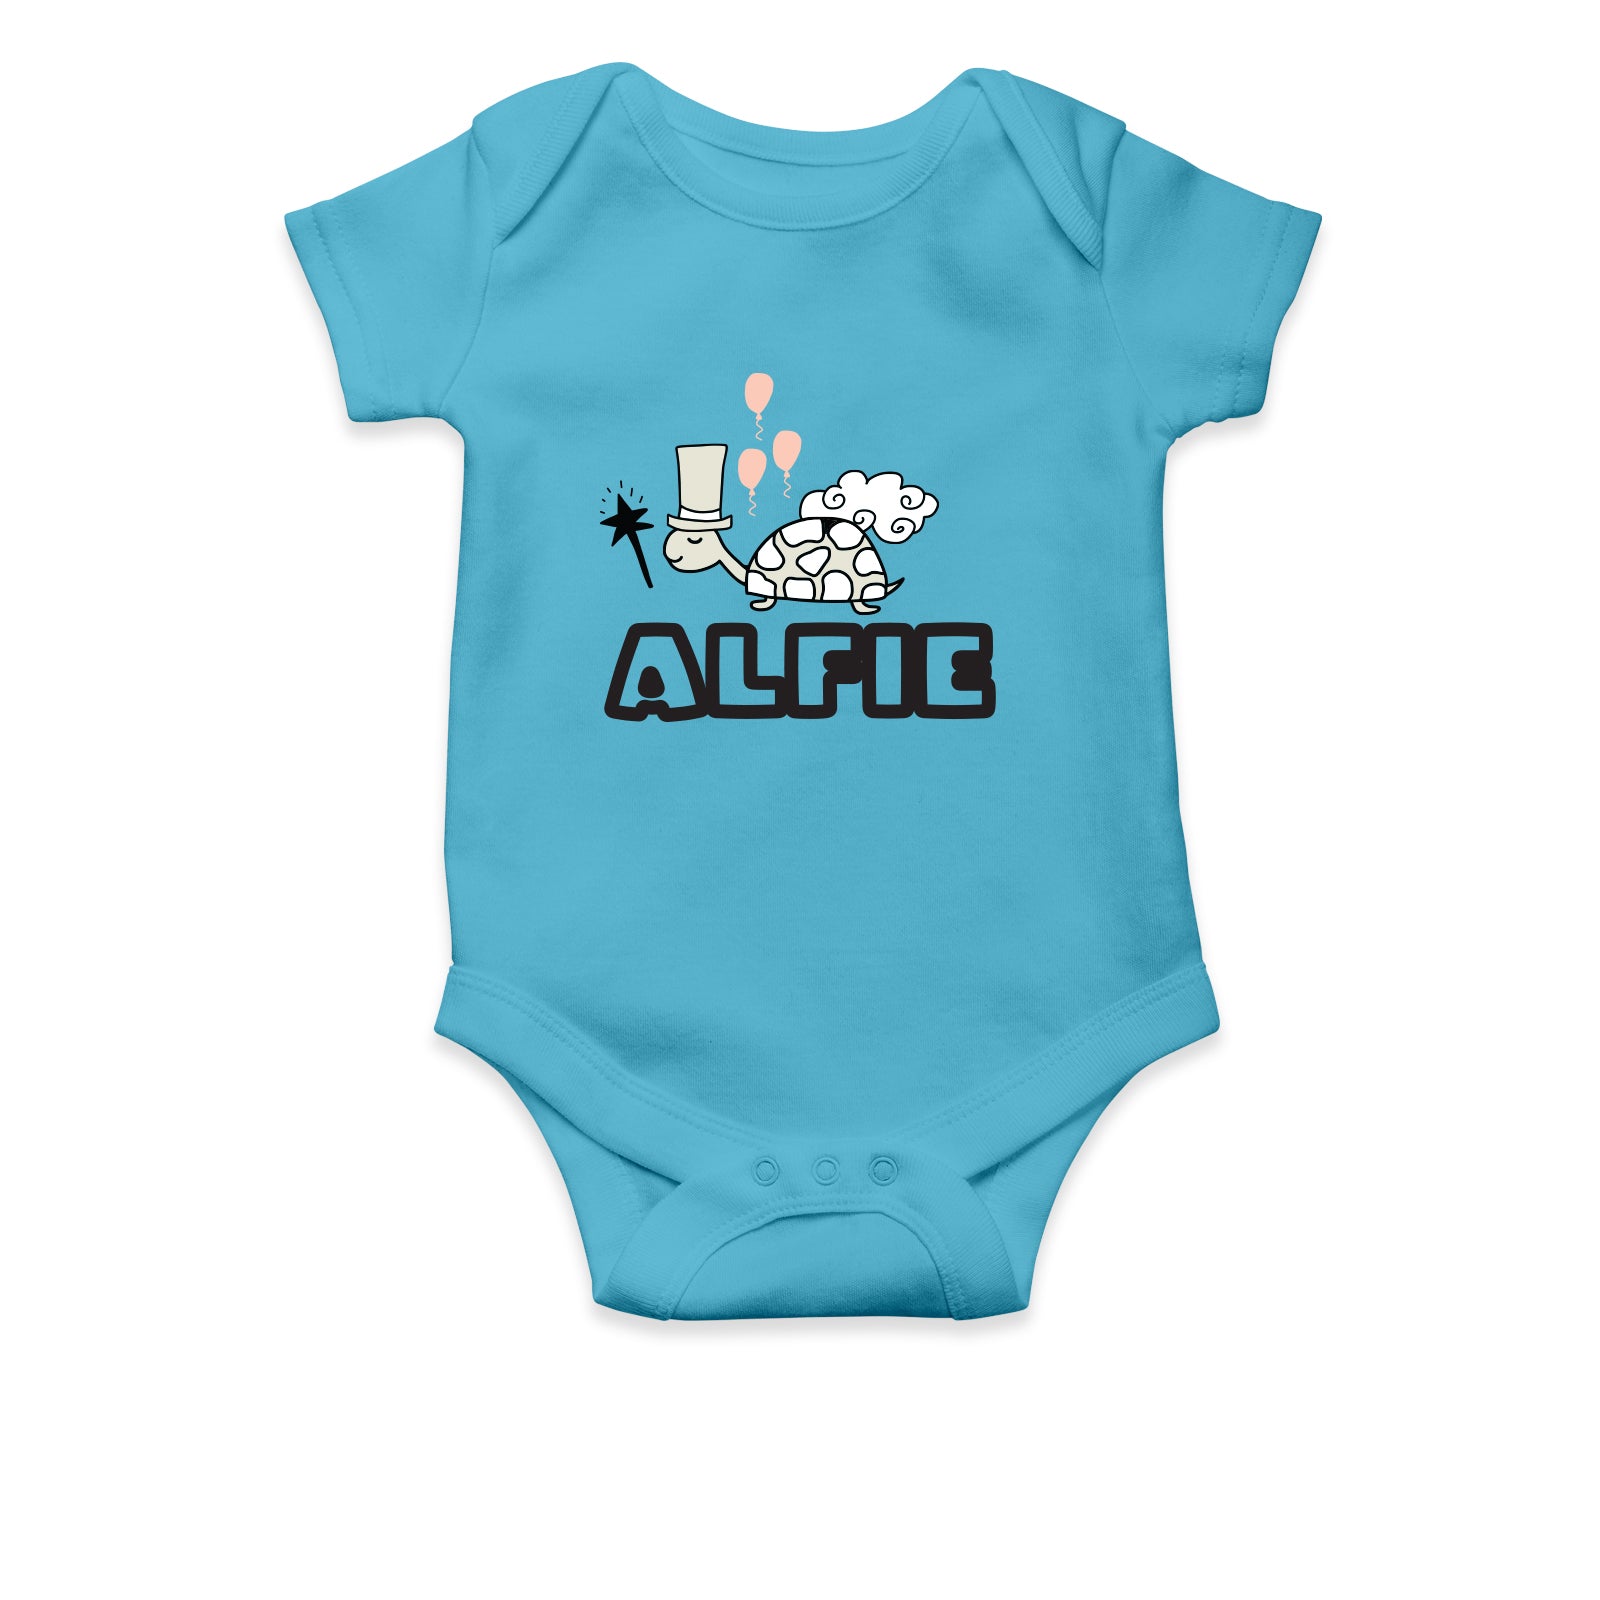 Personalised White Baby Body Suit Grow Vest - BOLD